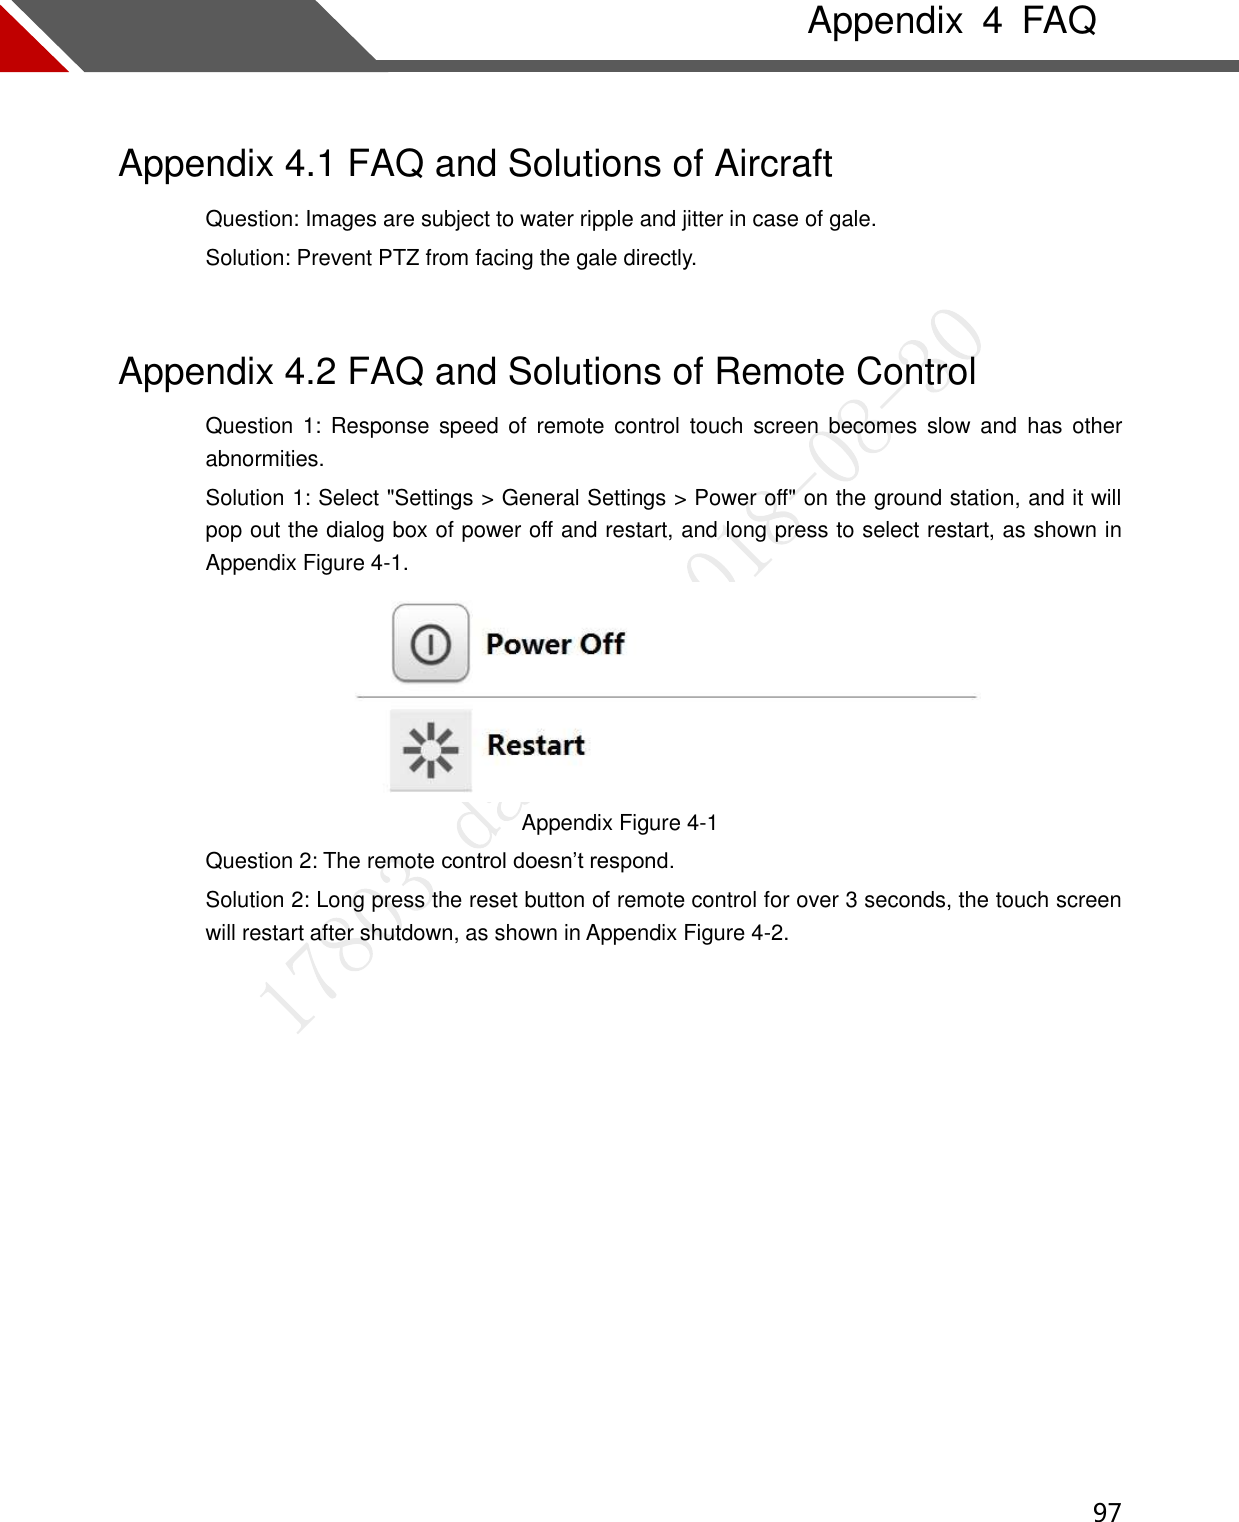  97   Appendix  4  FAQ Appendix 4.1 FAQ and Solutions of Aircraft Question: Images are subject to water ripple and jitter in case of gale.   Solution: Prevent PTZ from facing the gale directly.   Appendix 4.2 FAQ and Solutions of Remote Control Question 1:  Response speed  of  remote control  touch  screen  becomes slow  and  has  other abnormities. Solution 1: Select &quot;Settings &gt; General Settings &gt; Power off&quot; on the ground station, and it will pop out the dialog box of power off and restart, and long press to select restart, as shown in Appendix Figure 4-1.  Appendix Figure 4-1 Question 2: The remote control doesn’t respond. Solution 2: Long press the reset button of remote control for over 3 seconds, the touch screen will restart after shutdown, as shown in Appendix Figure 4-2.   